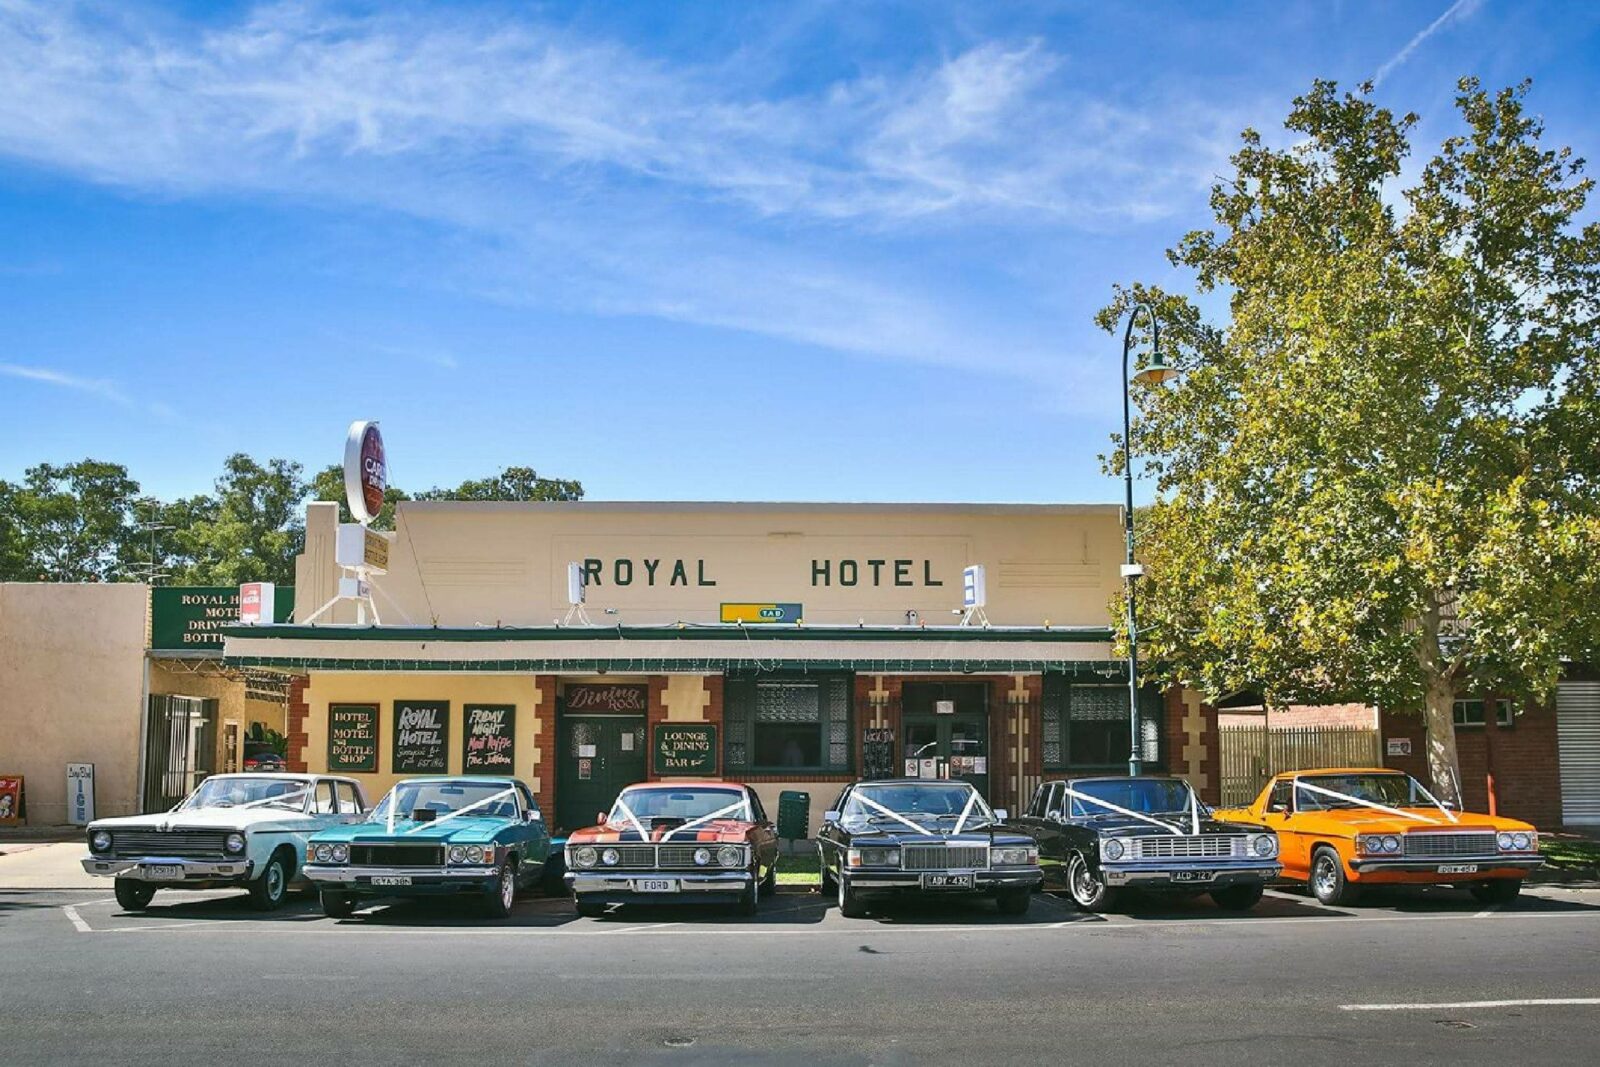 Royal Hotel and wedding cars out front